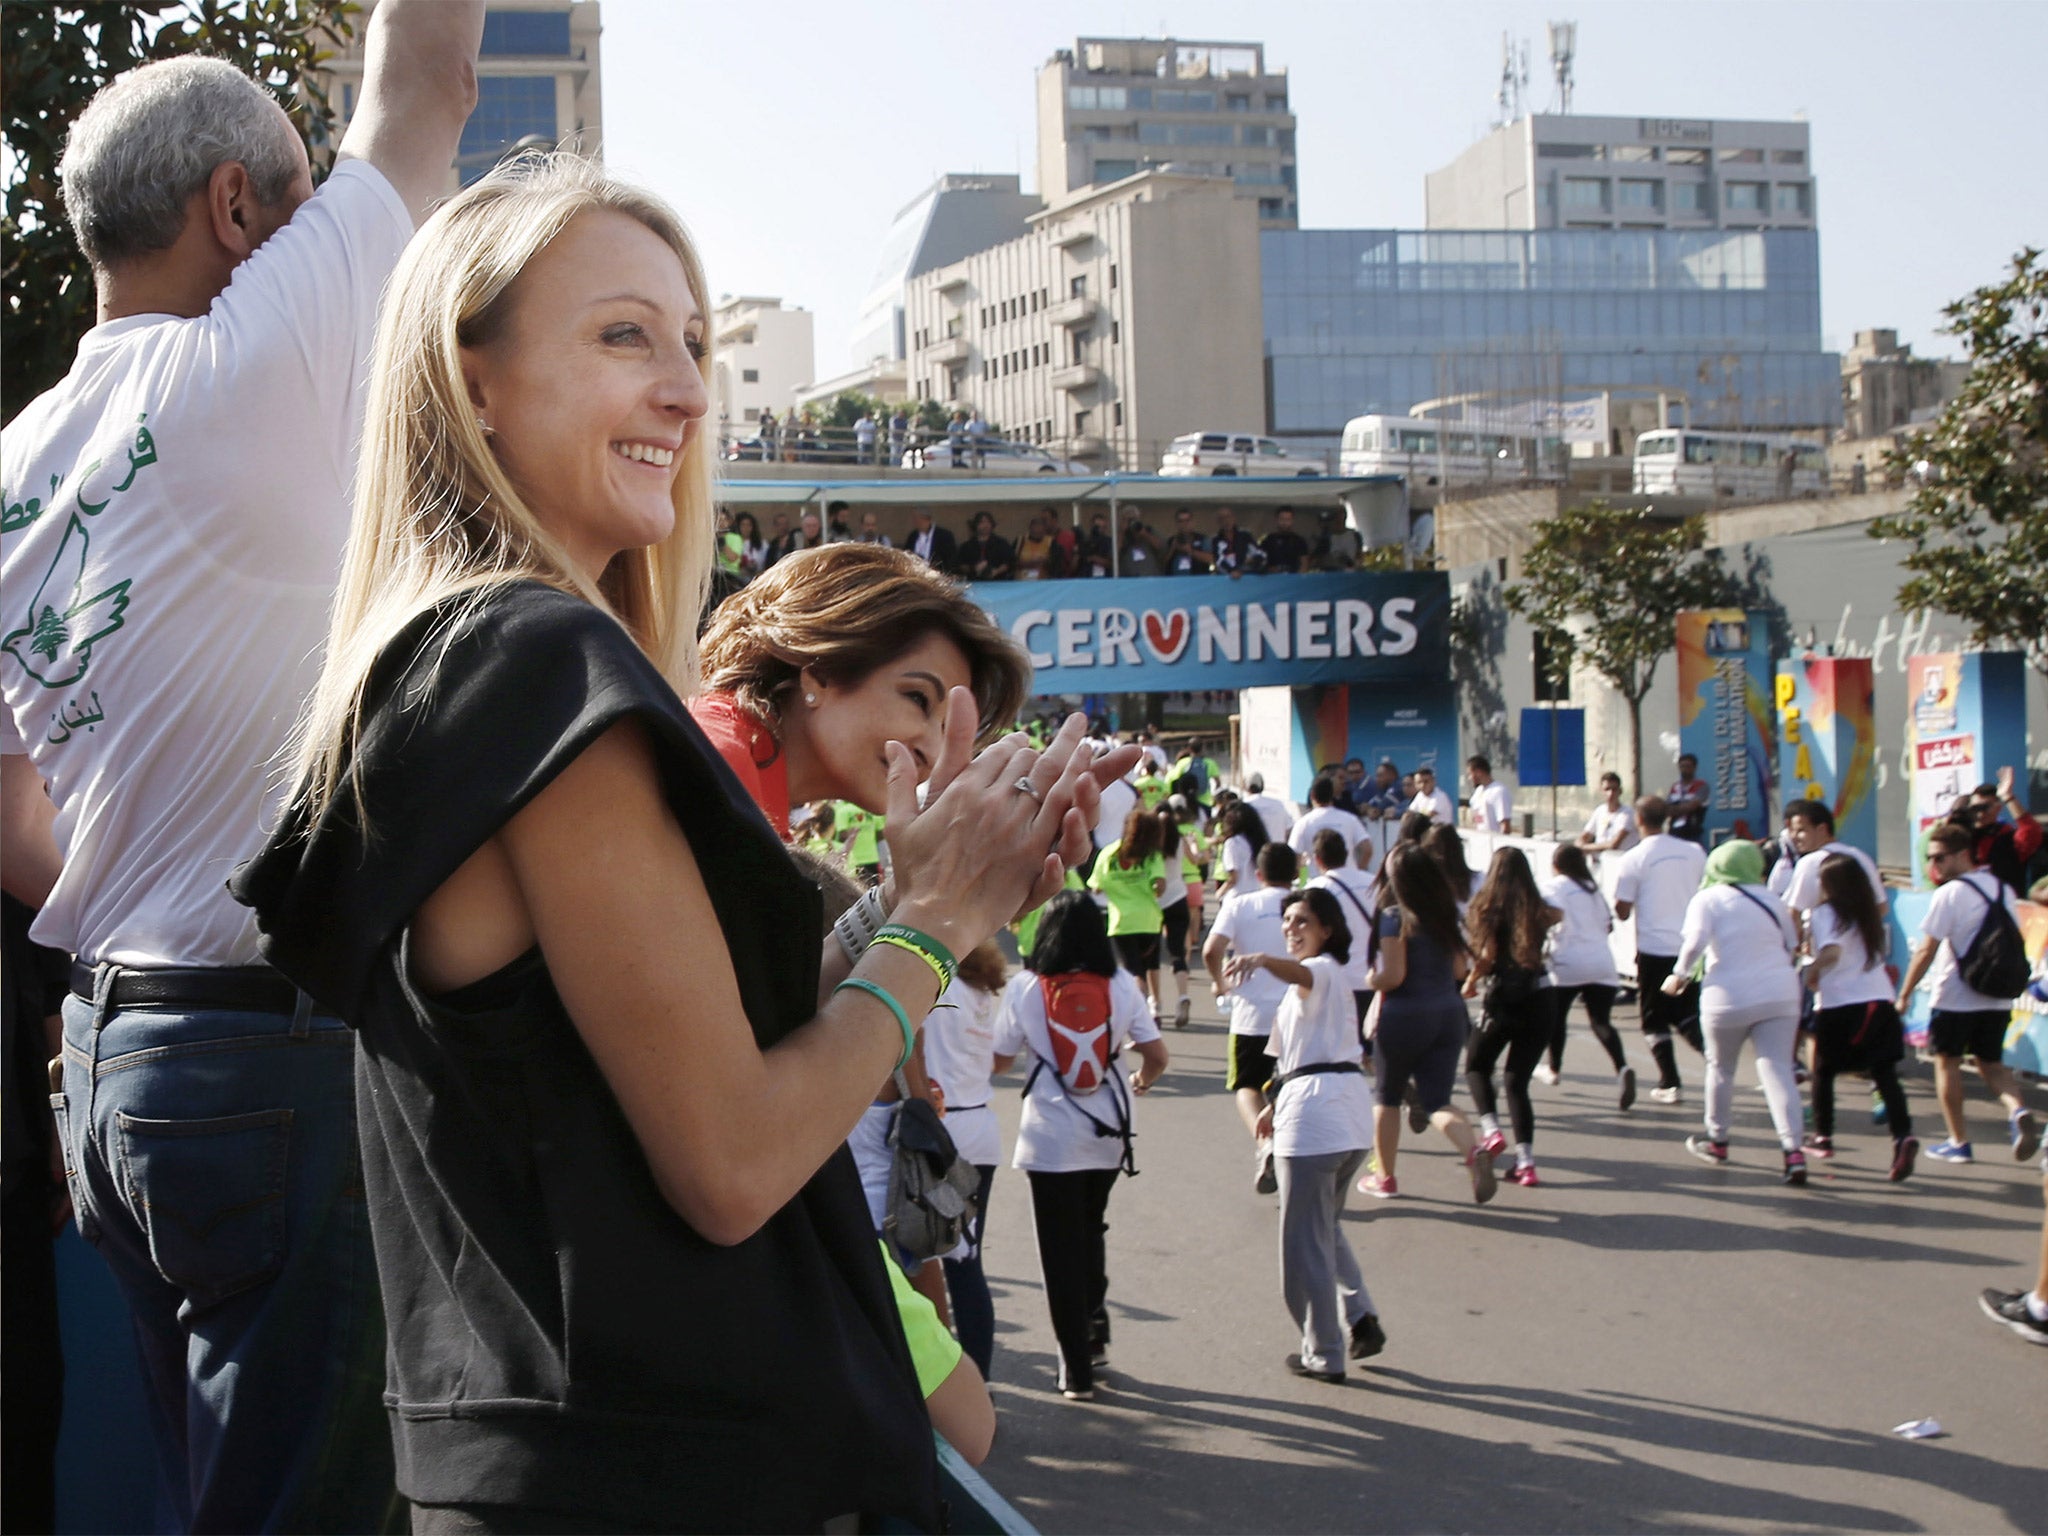 Paula Radcliffe was among those condemning the decision